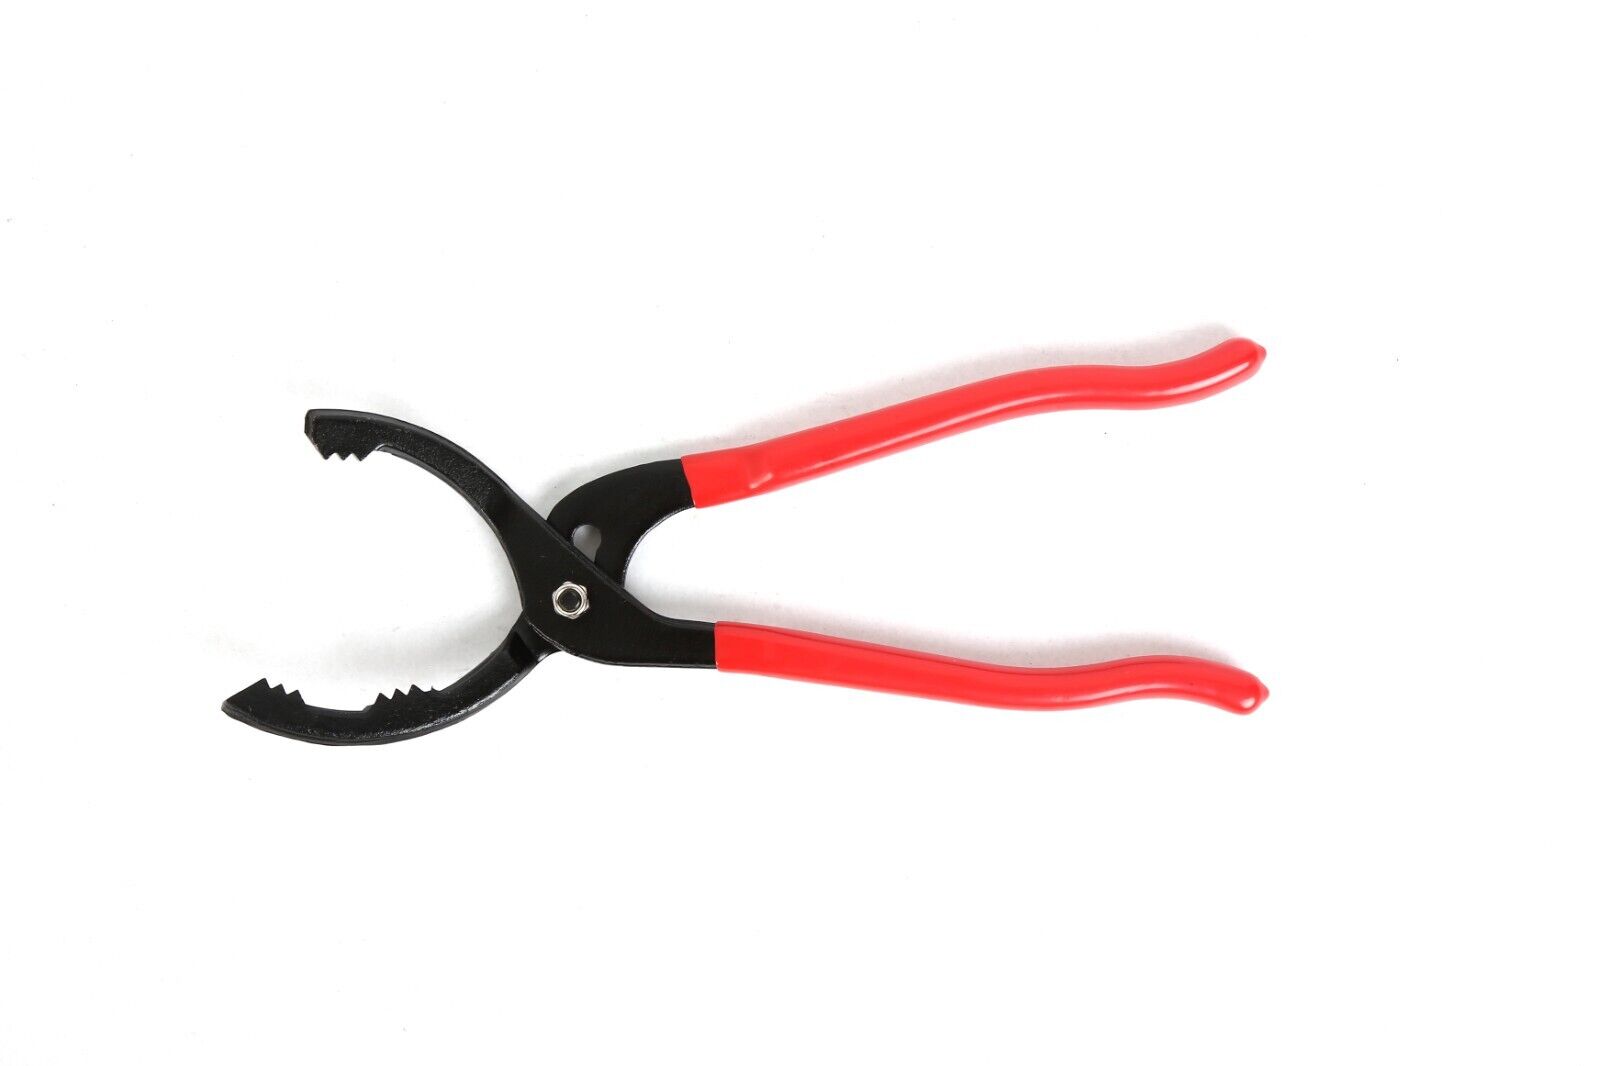 Great Choice Products Adjustable Oil Filter Wrench And Oil Filter Pliers Set W/3-Jaw Oil Filter Wrench